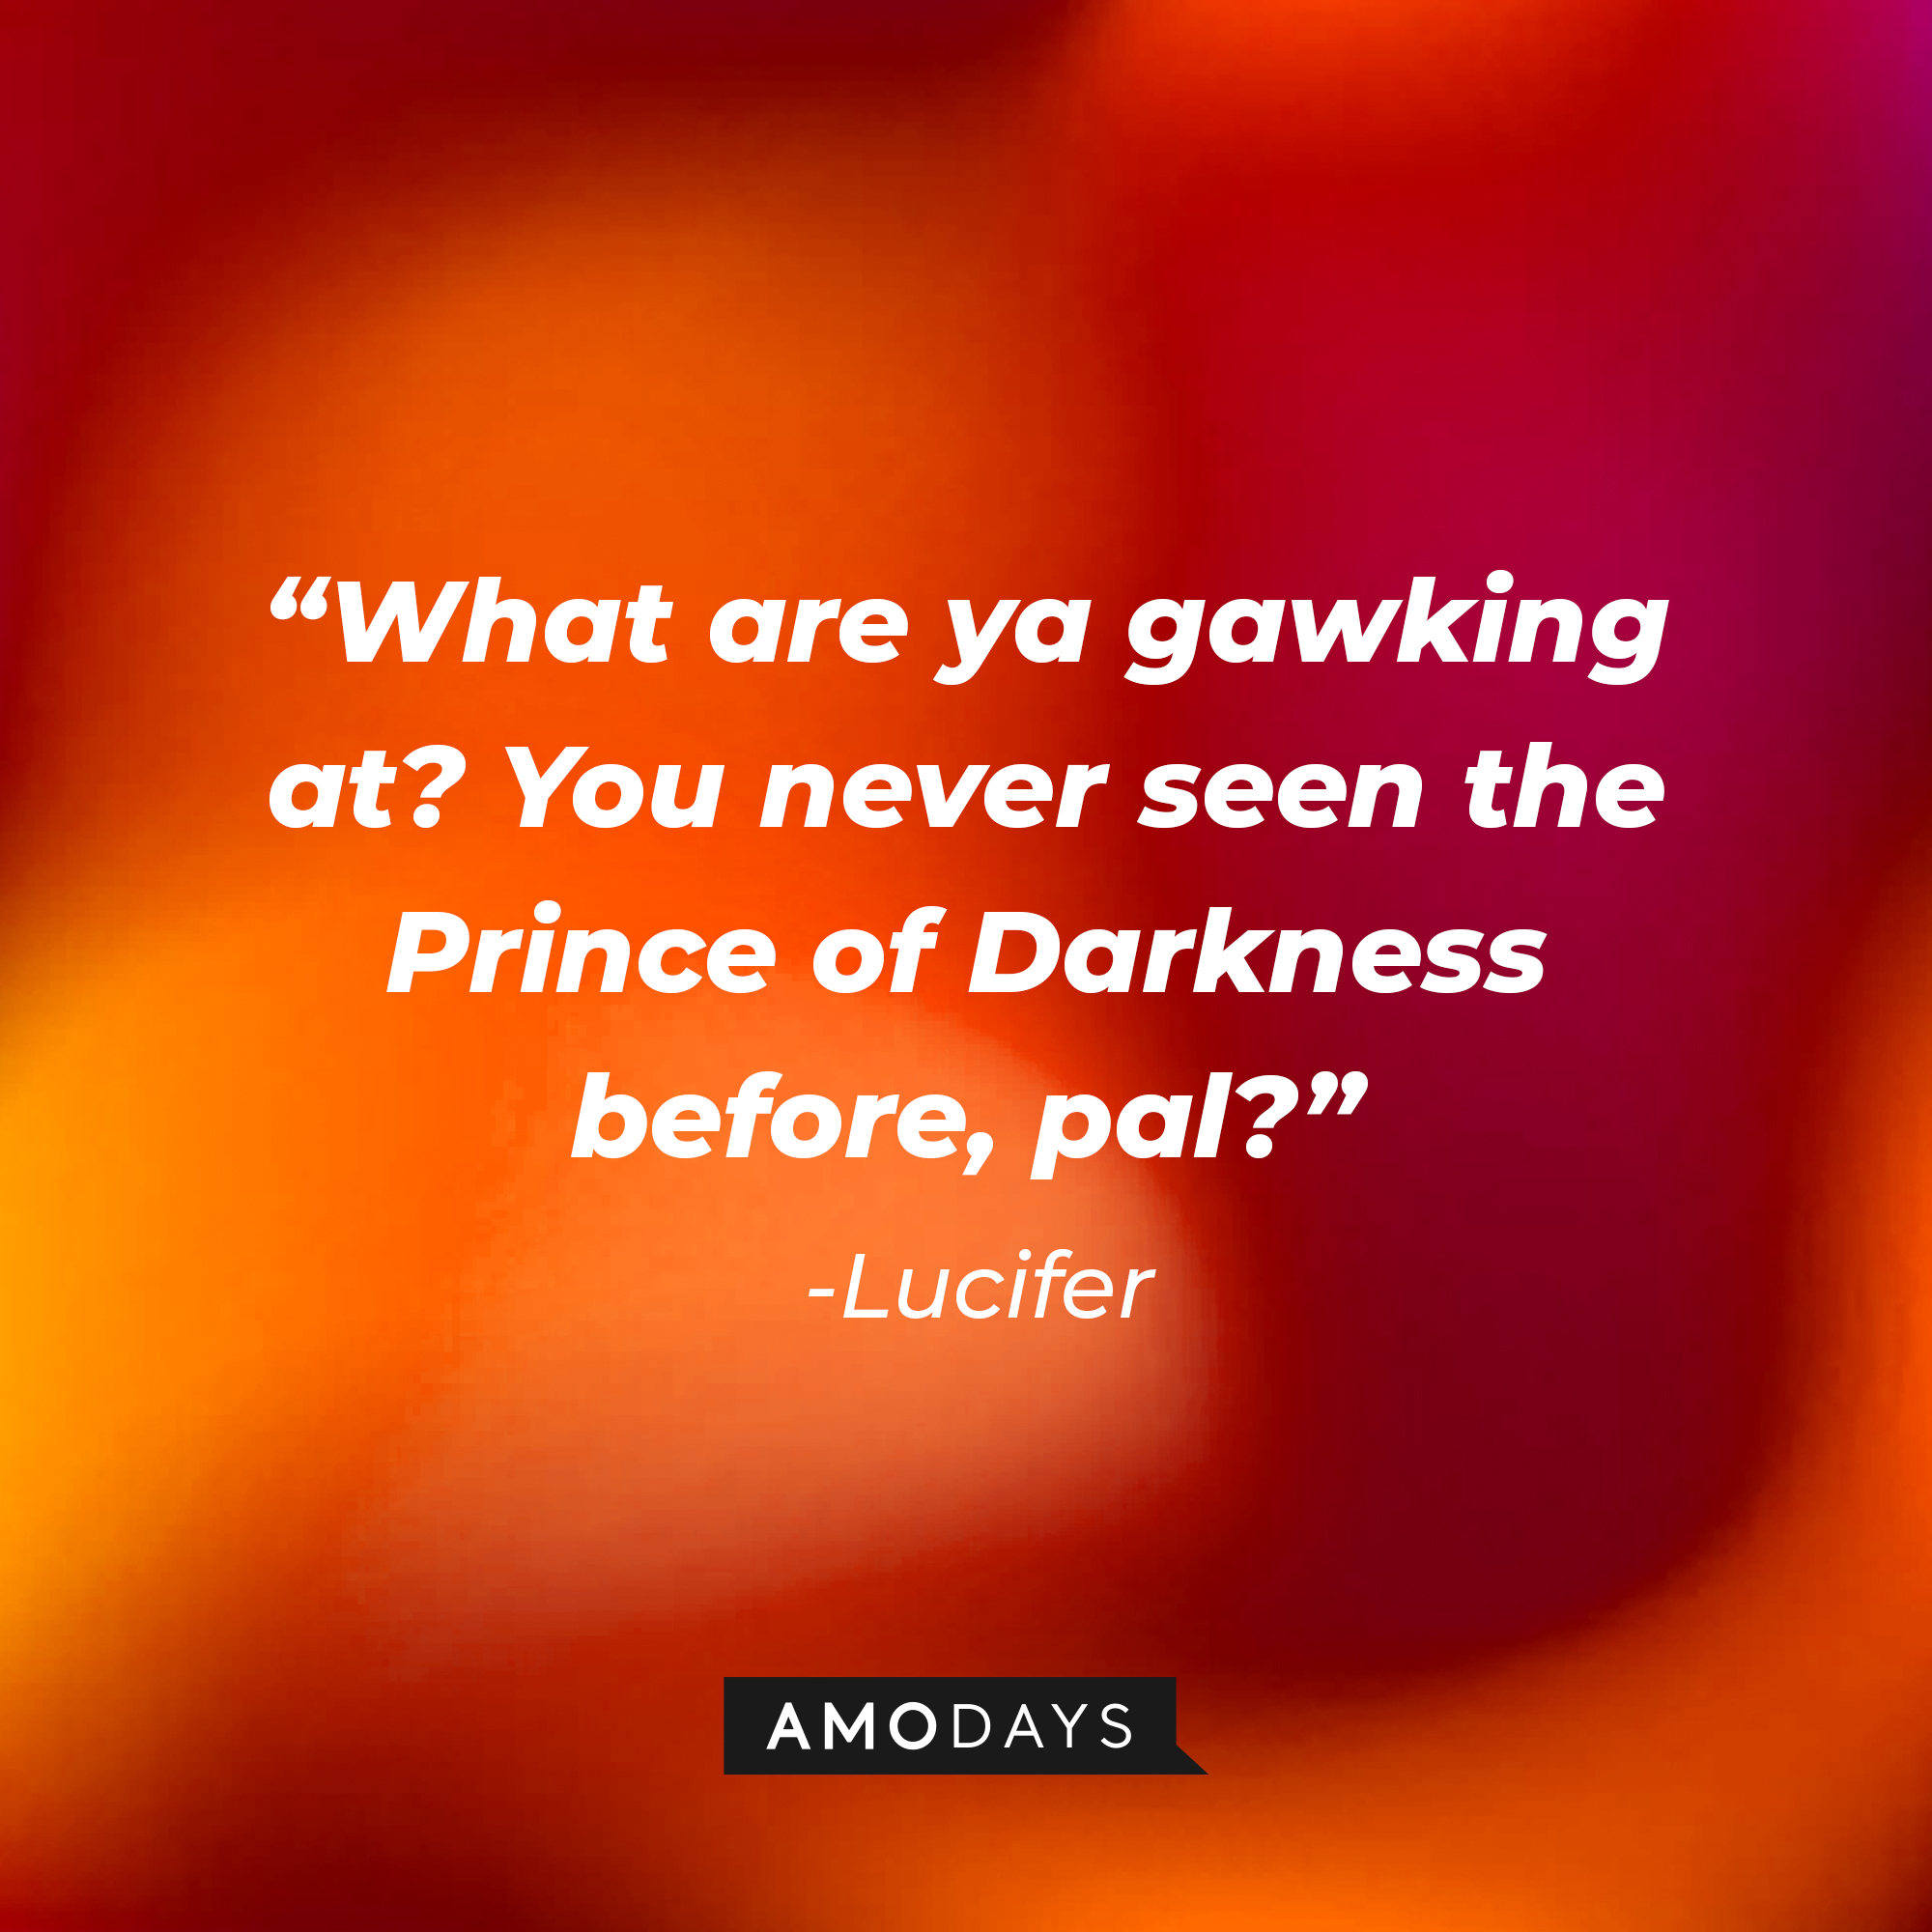 Lucifer’s quote:  "What are ya gawking at? You never seen the Prince of Darkness before, pal?" | Source: AmoDays